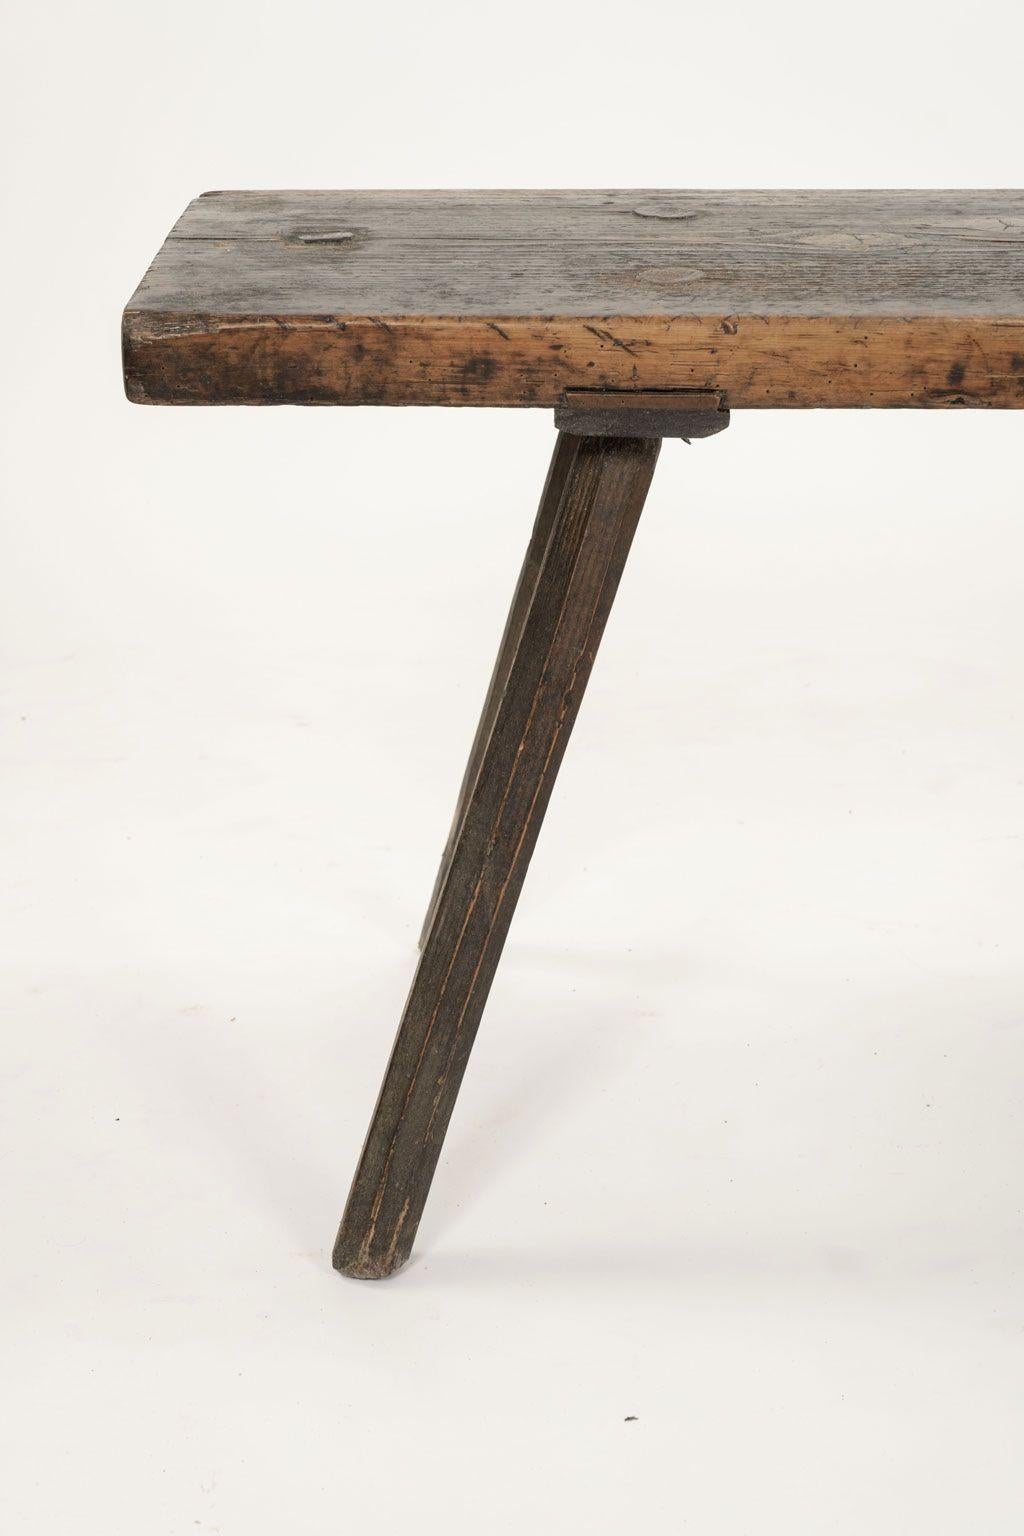 Early long pine bench circa 1710-1739: single thick plank of pine raised upon four splayed simple carved legs. Early finish. Sturdy, stable pegged construction.